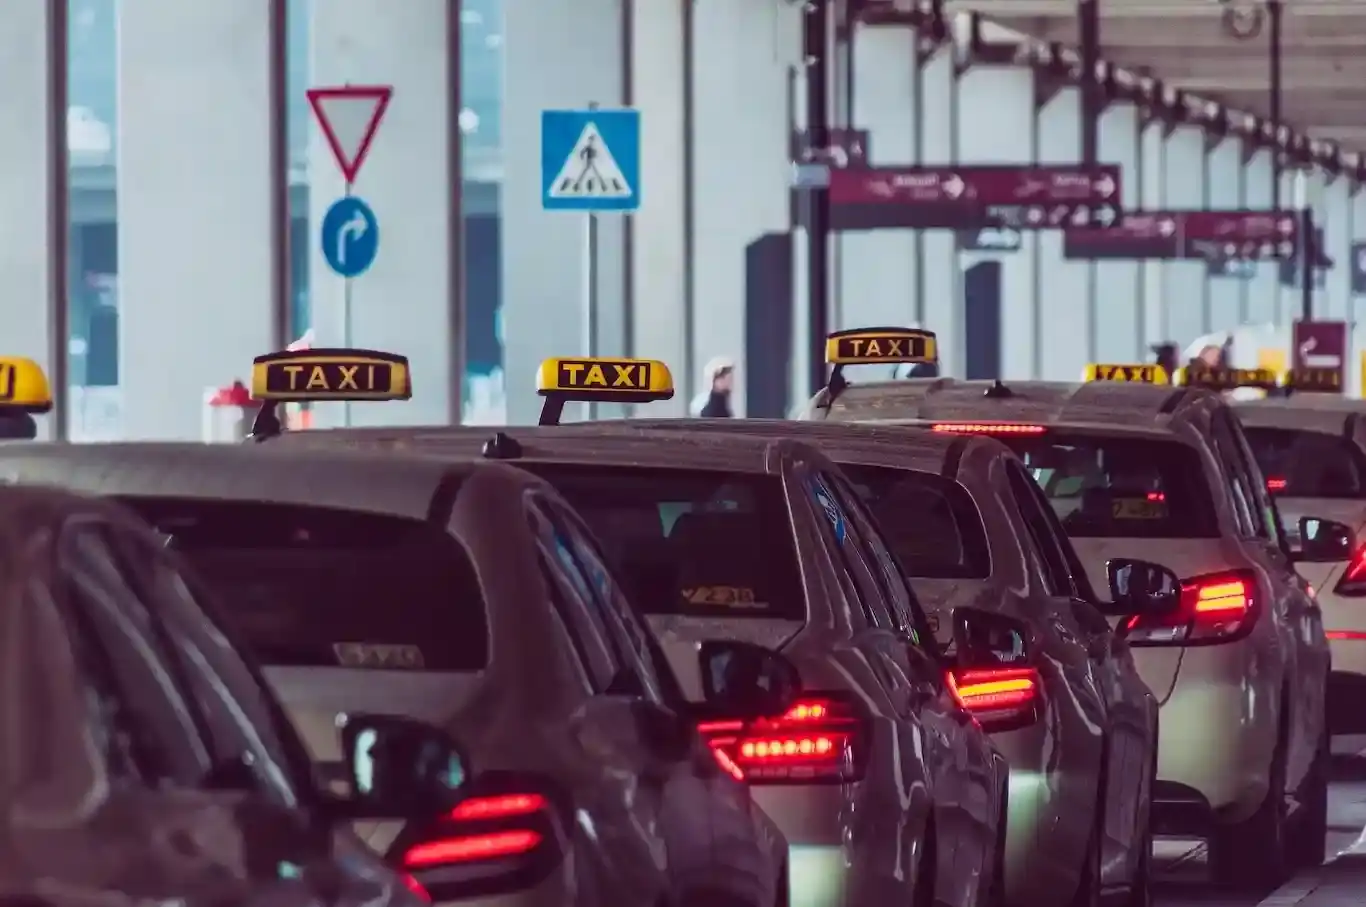 Taxi's lining up at the airport in Mexico City.